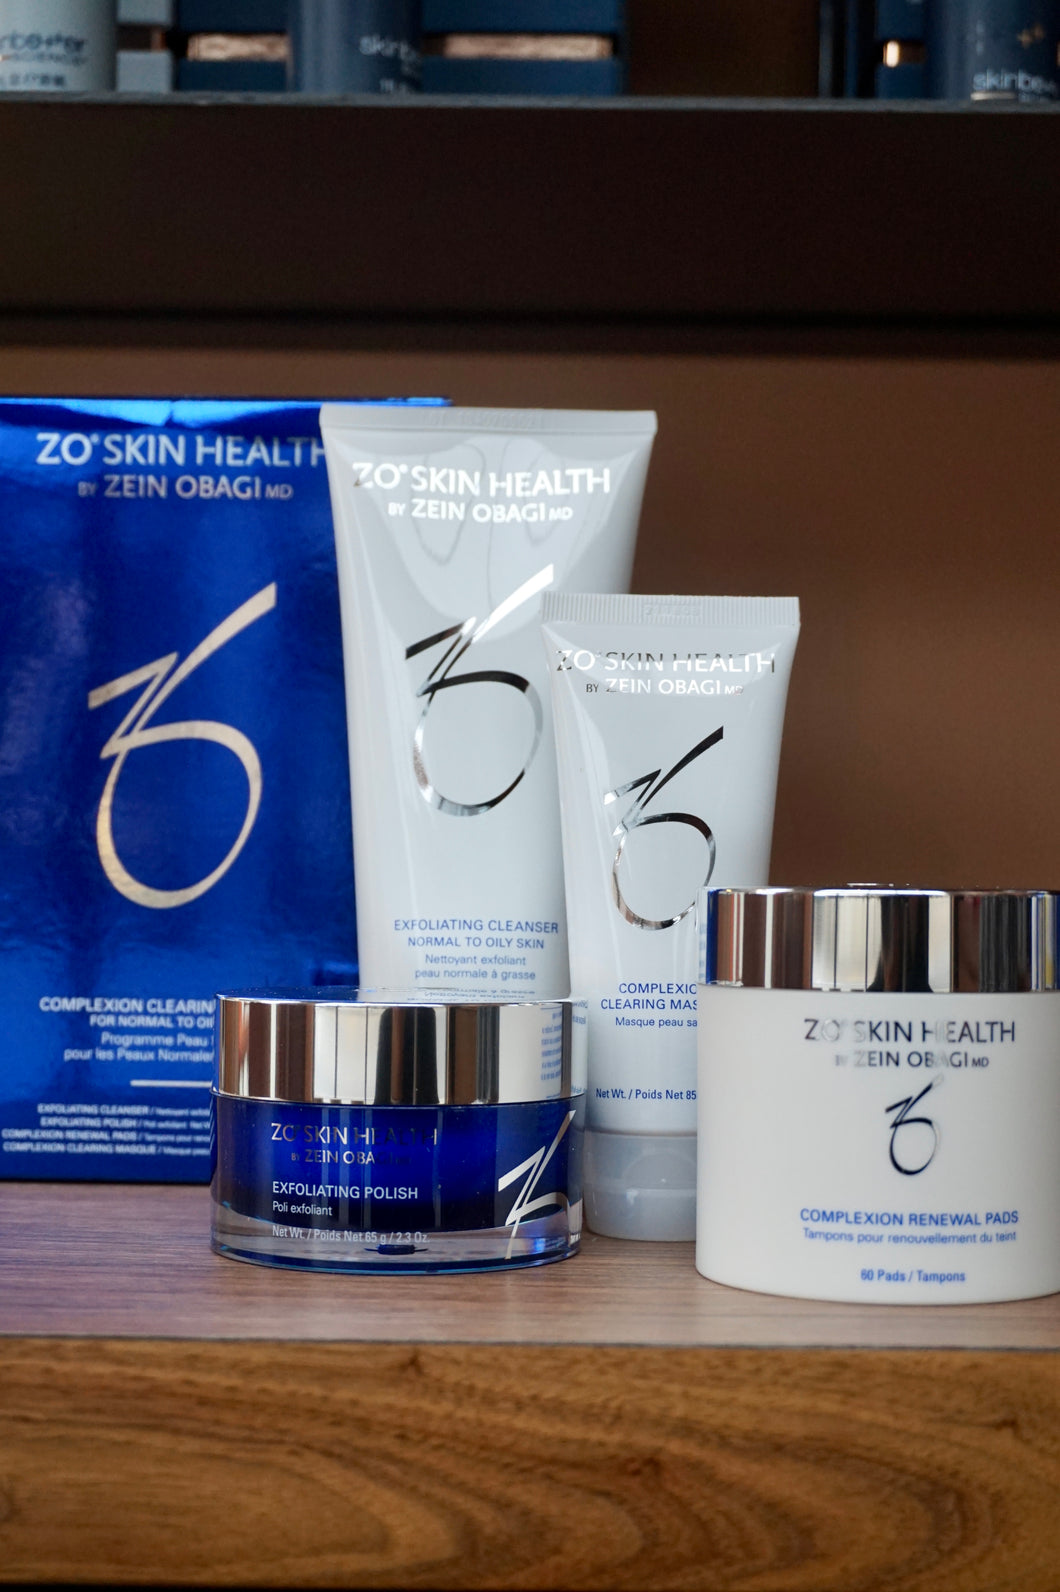 ZO Skin Health Complexion Clearing program